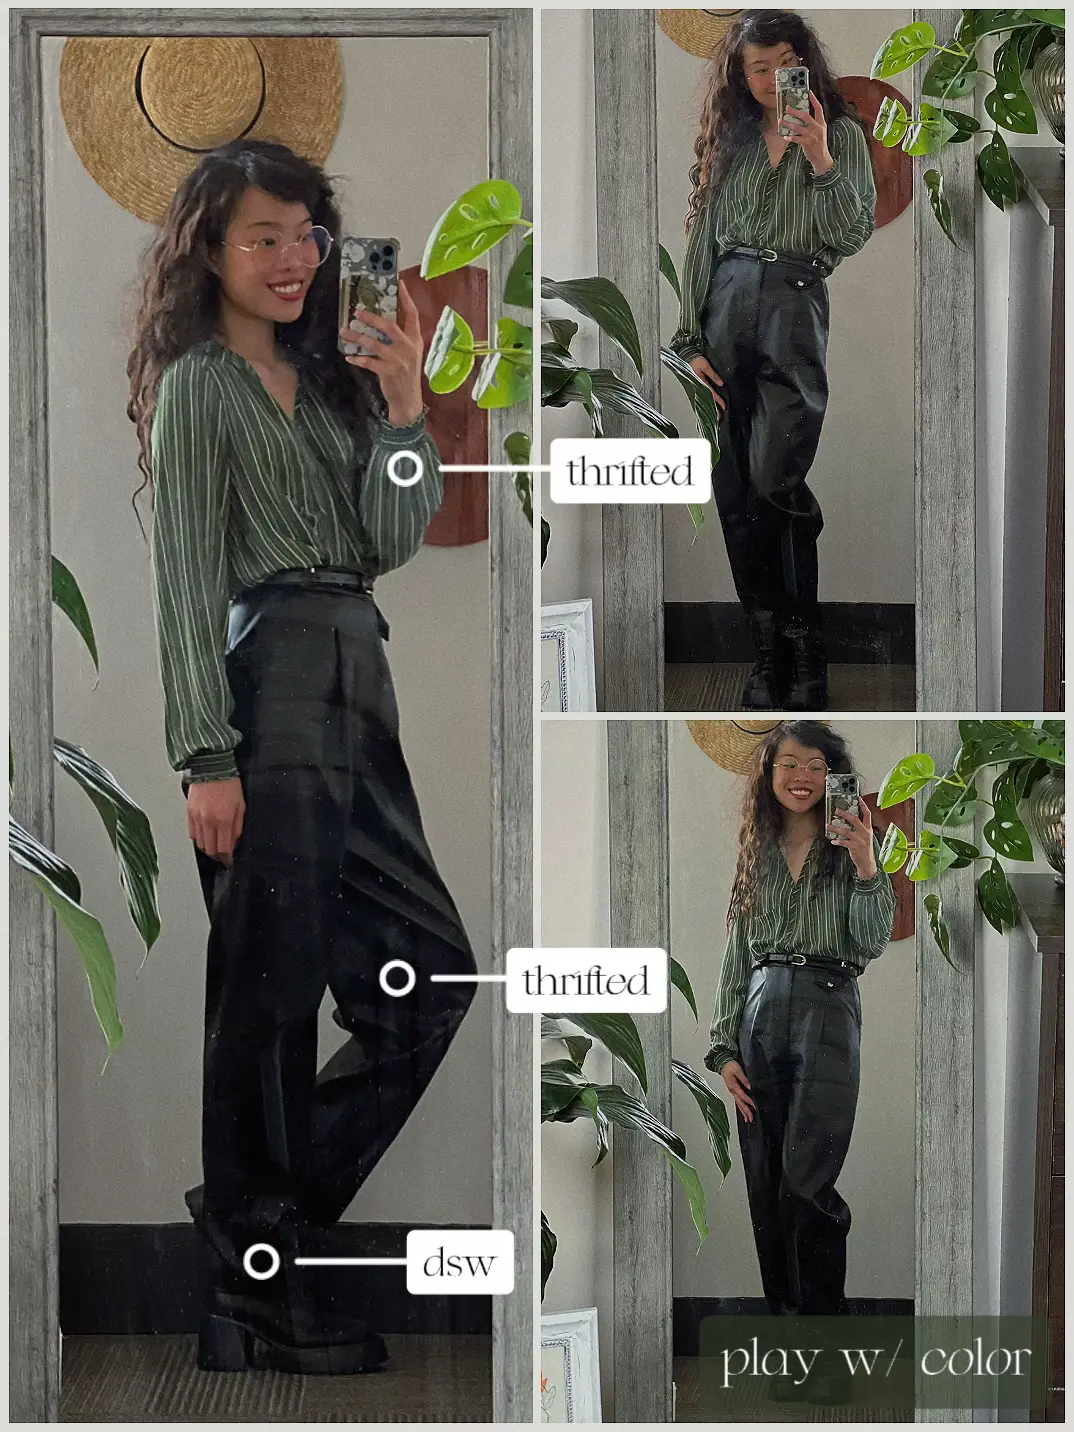 4 Casual Ways To Style Leather Trousers 👟, Gallery posted by Lydia Fleur